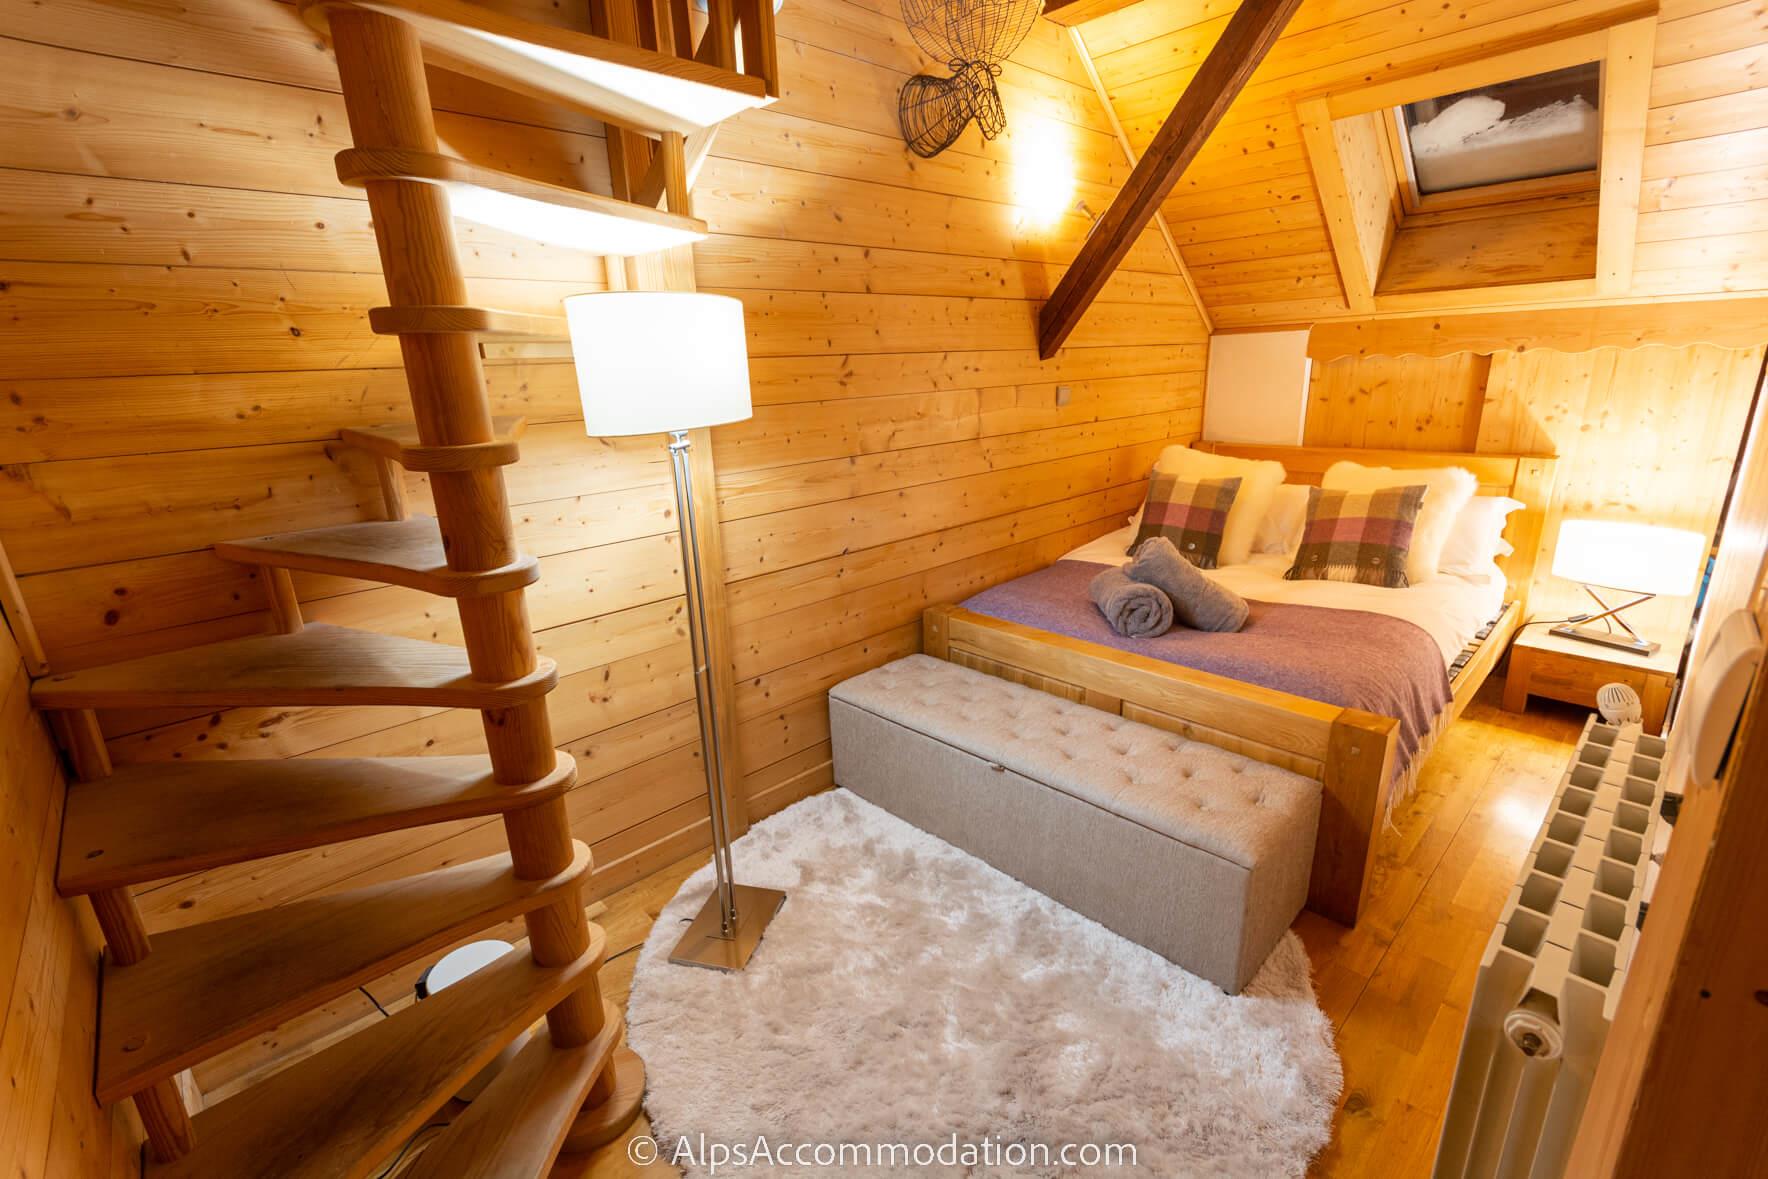 La Maison Blanche Samoëns - Large double bedroom with access to loft room